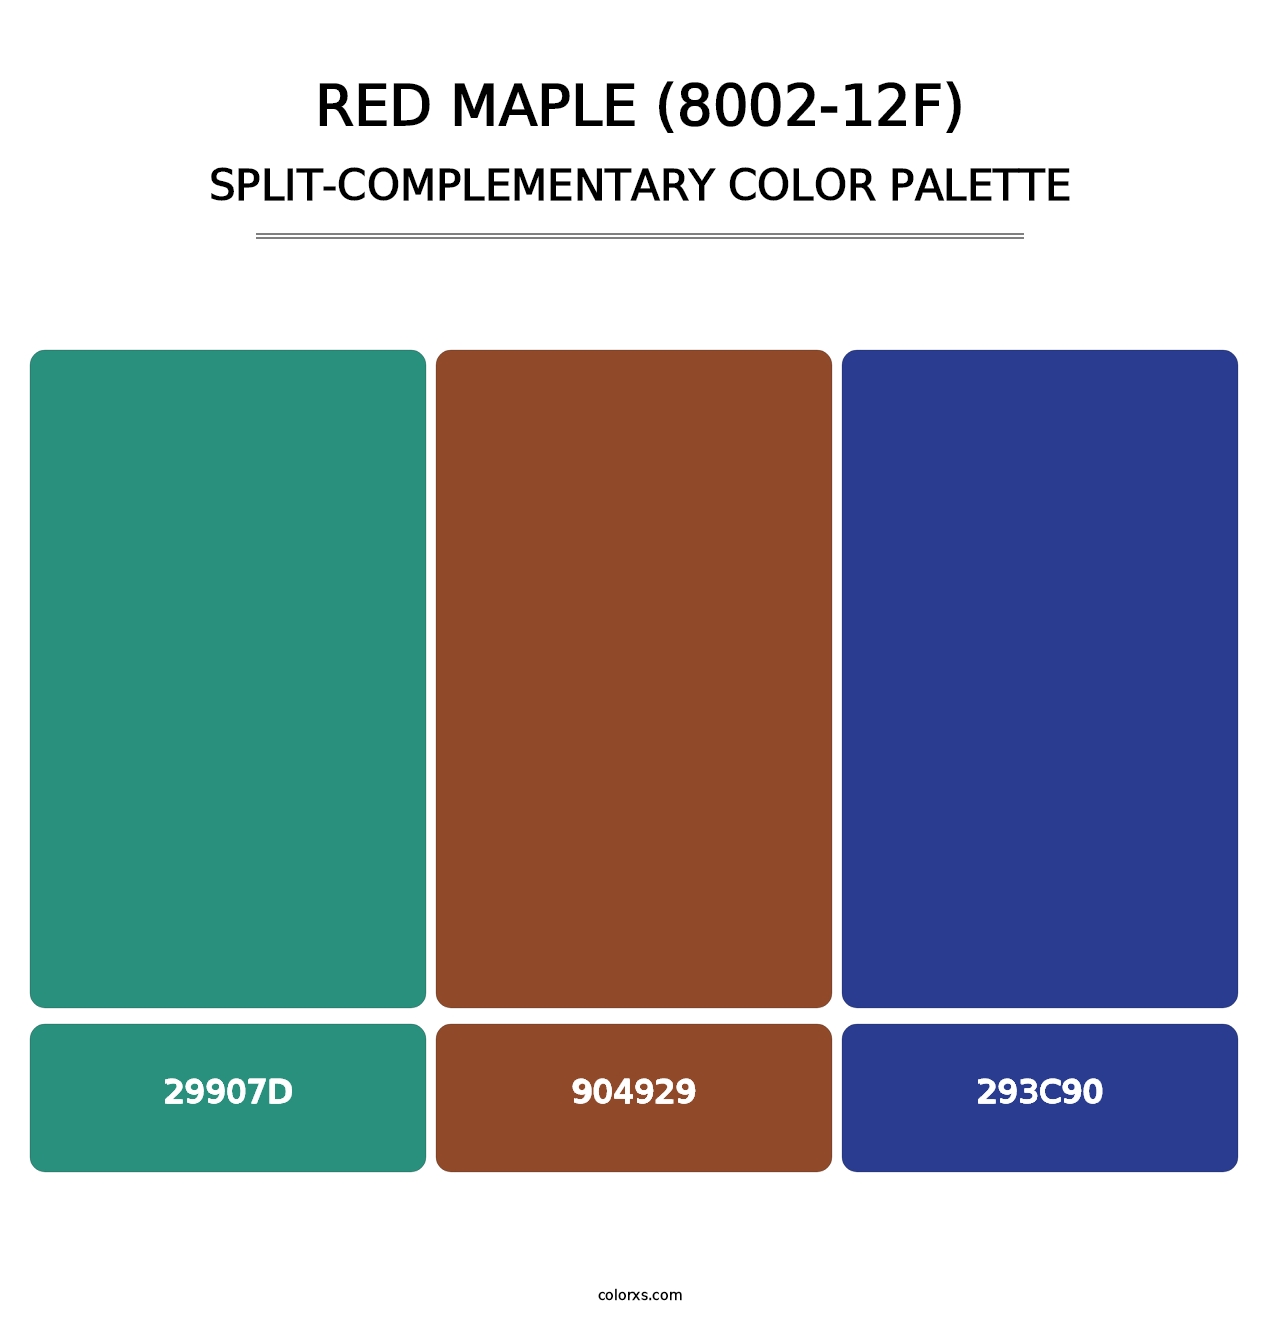 Red Maple (8002-12F) - Split-Complementary Color Palette